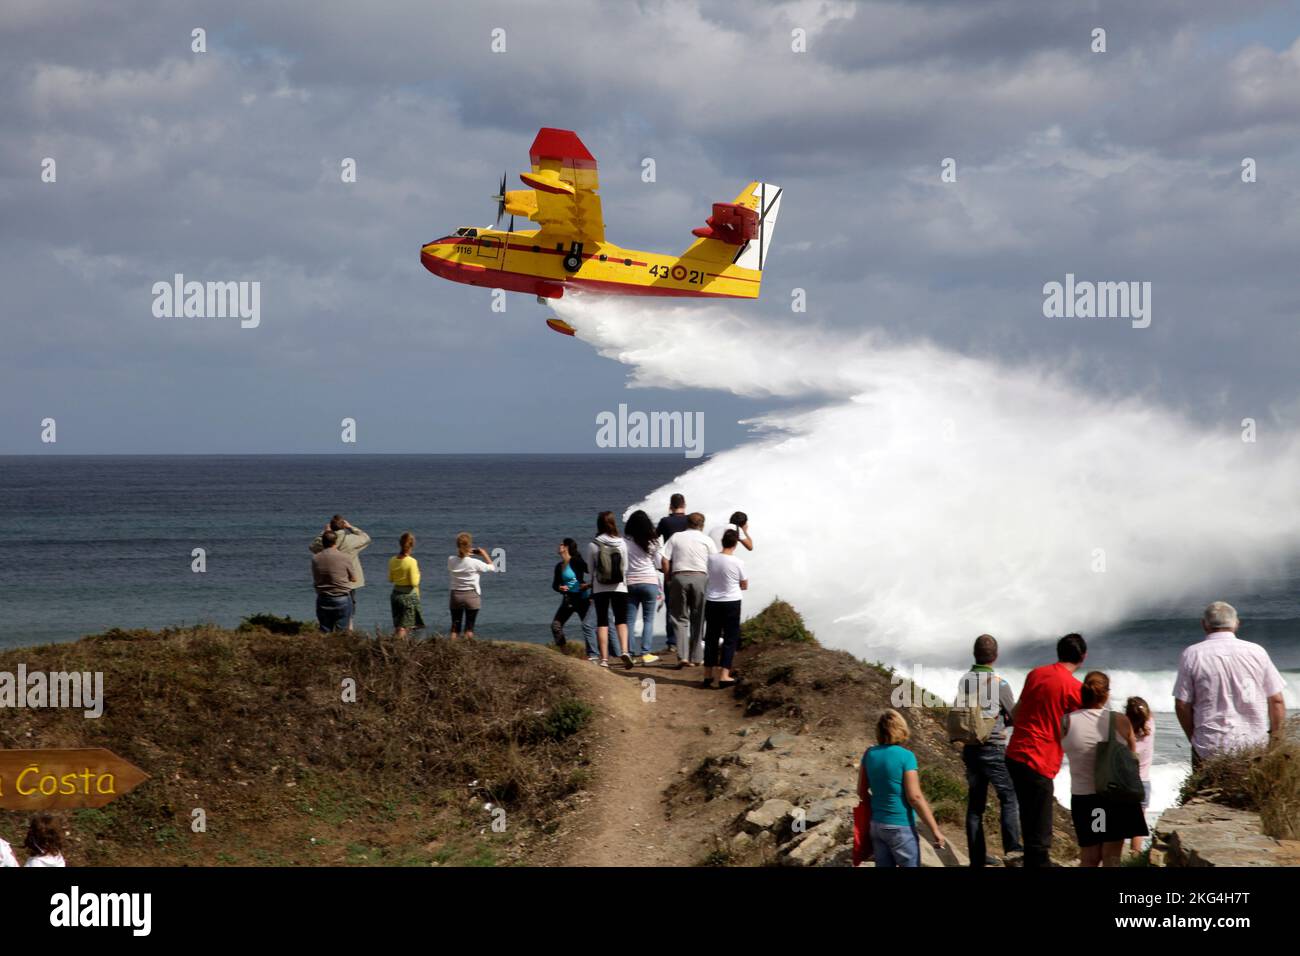 Small firefightermen plane throwing water in front of the coast with people watching it. Playa de las Catedrales, Galicia, Ribadeo, Lugo, Spain. Stock Photo